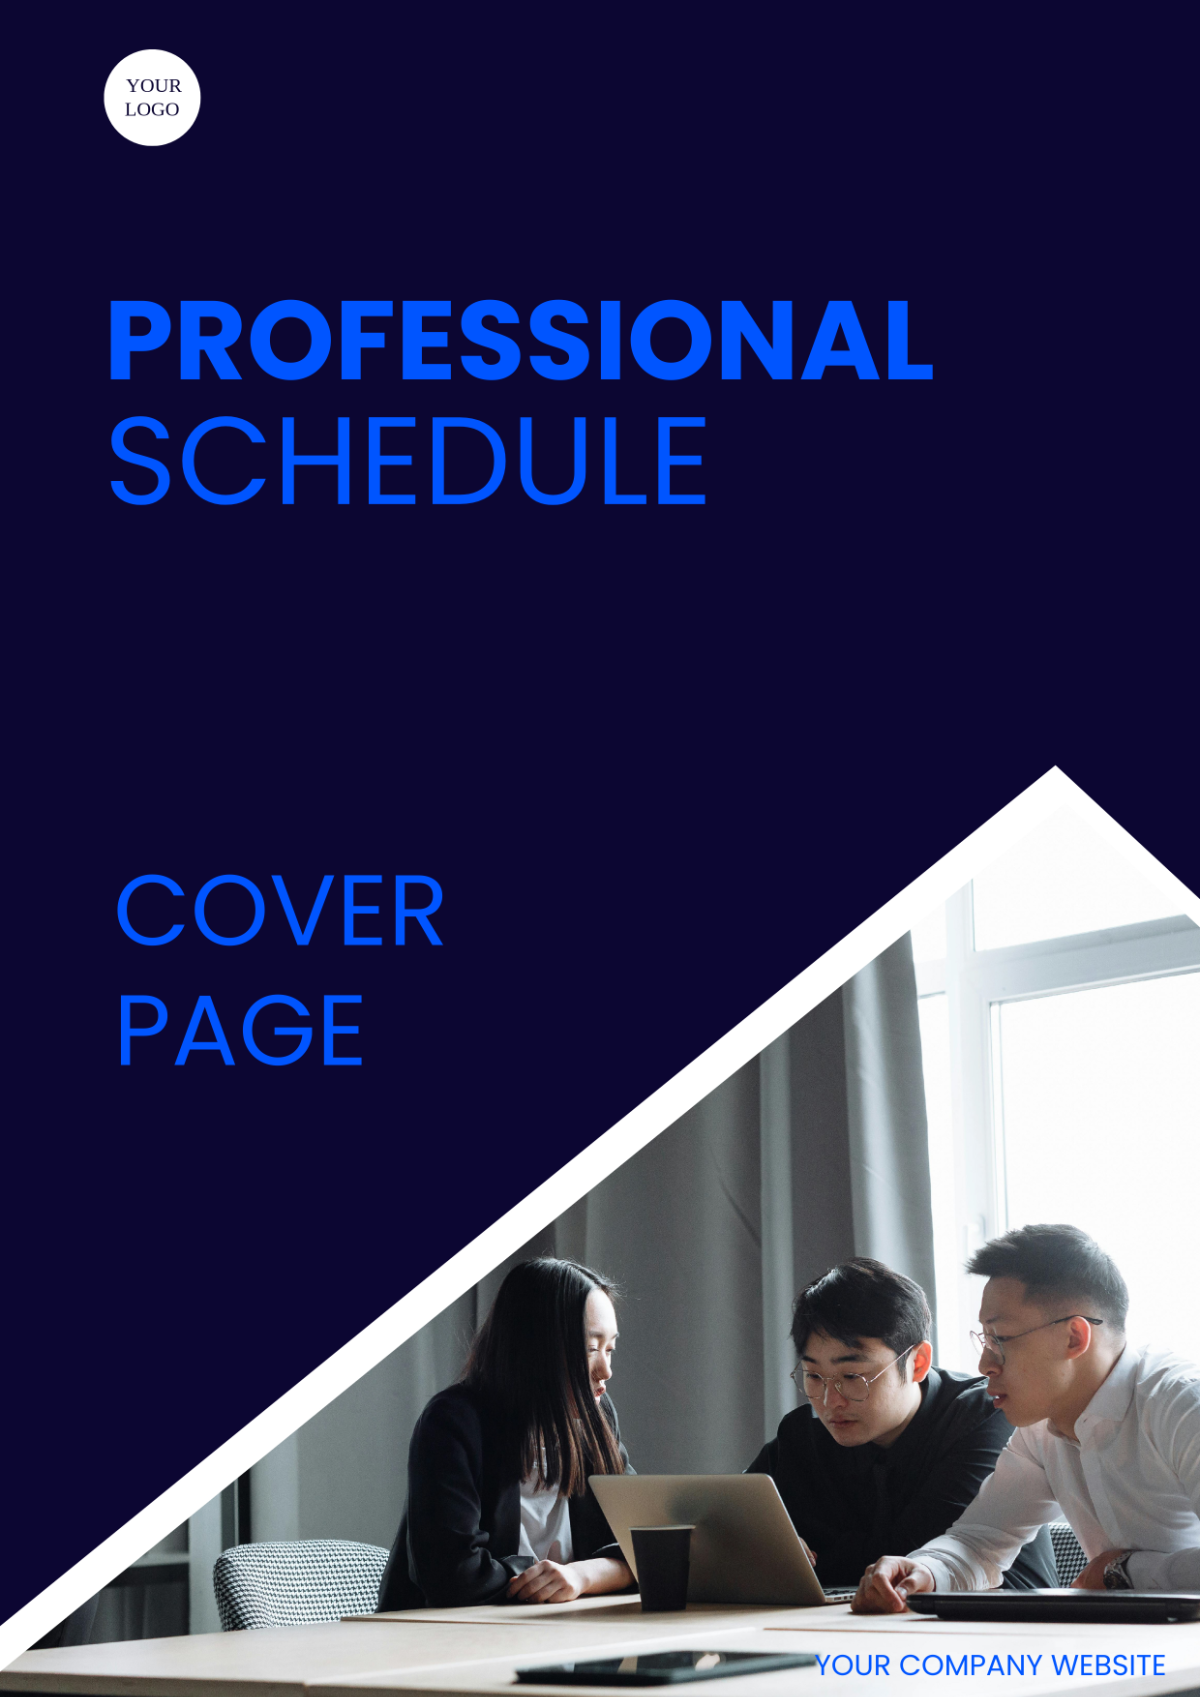 Professional Schedule Cover Page